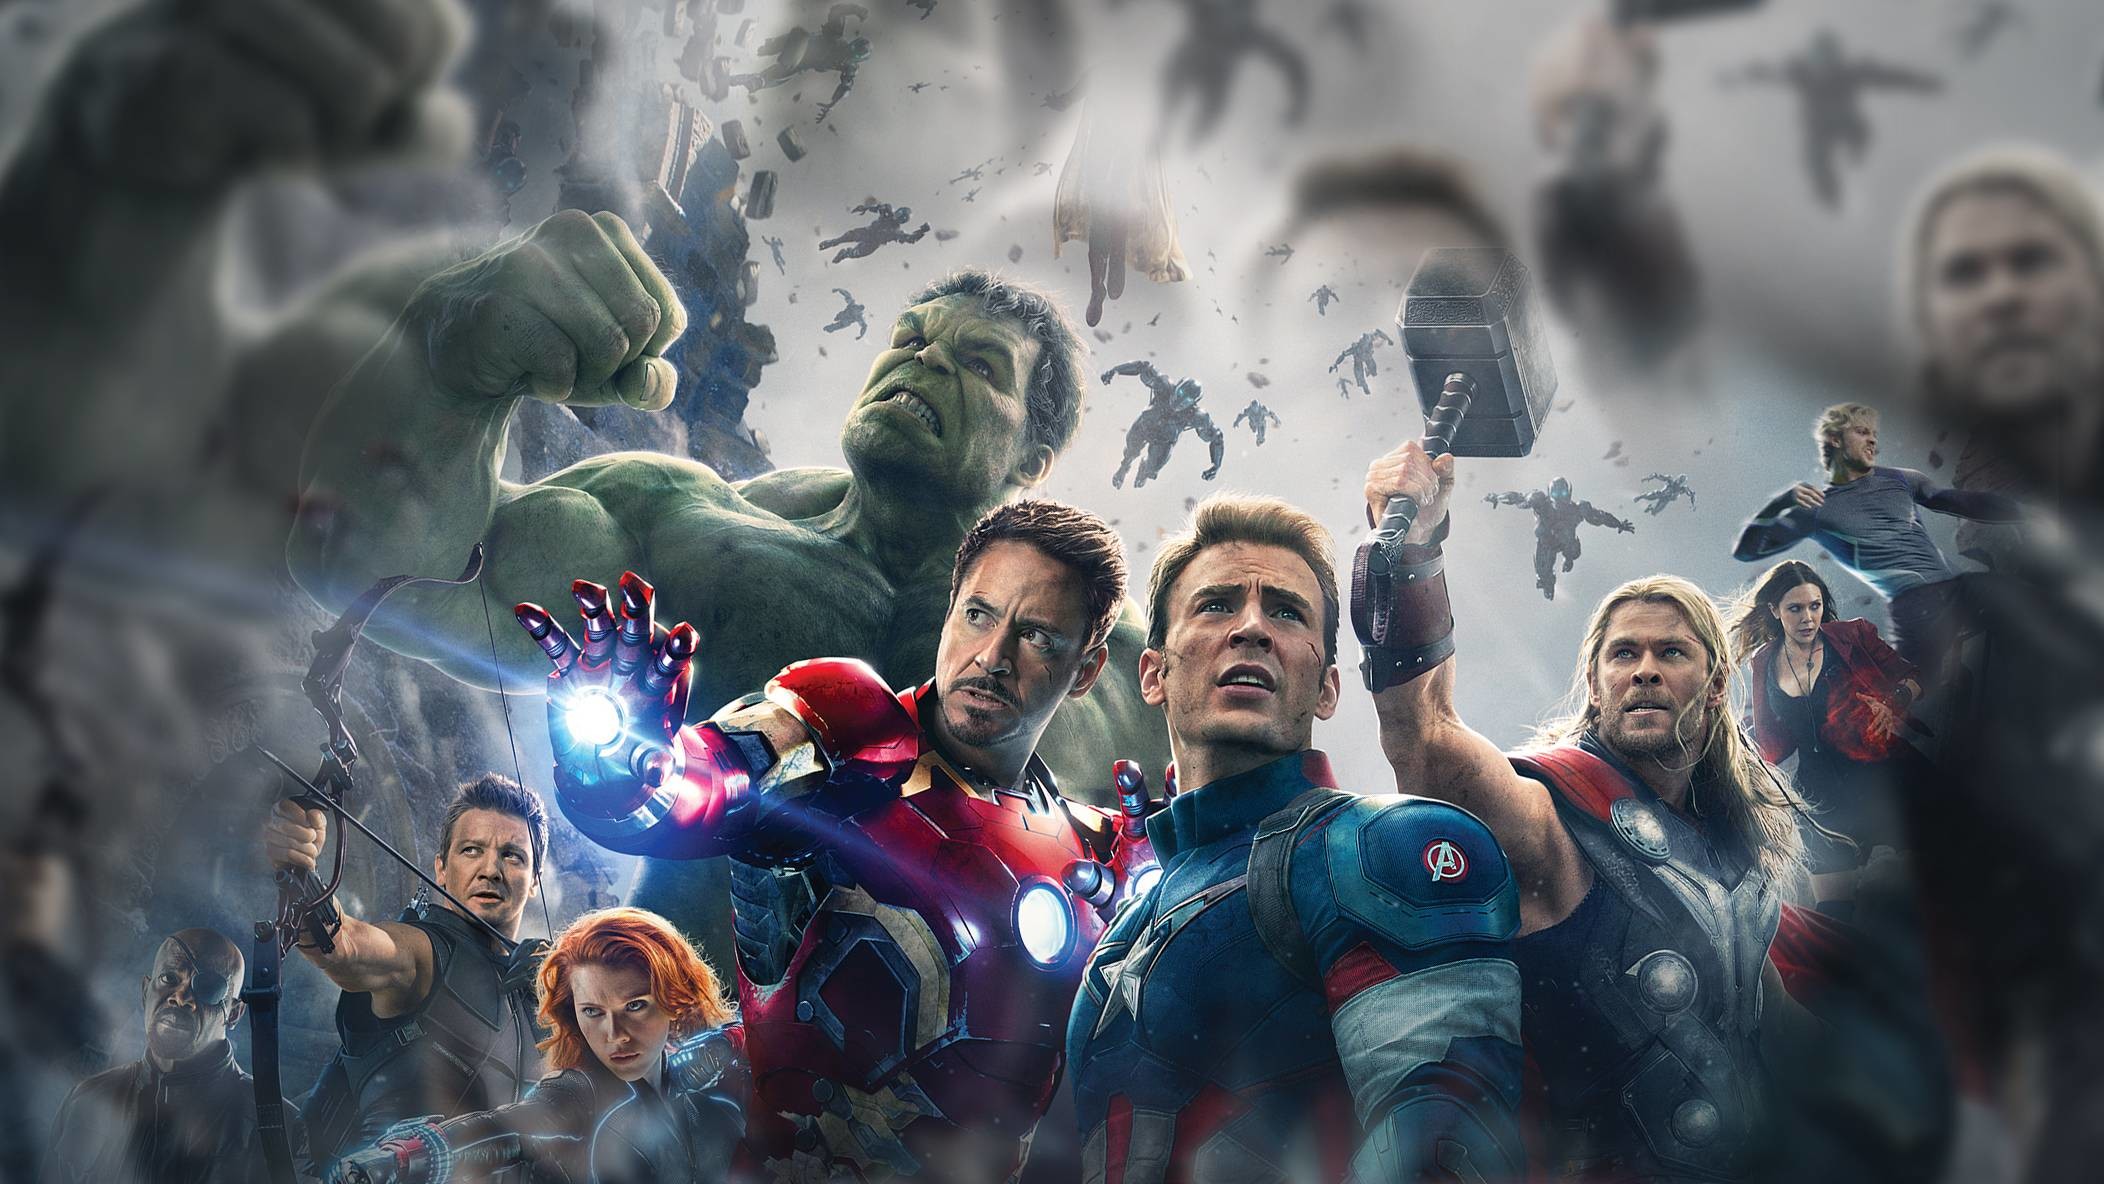 2104x1184 Film, Fictional Character, Crowd, The Avengers, Avengers Age of Ultron  Wallpaper in